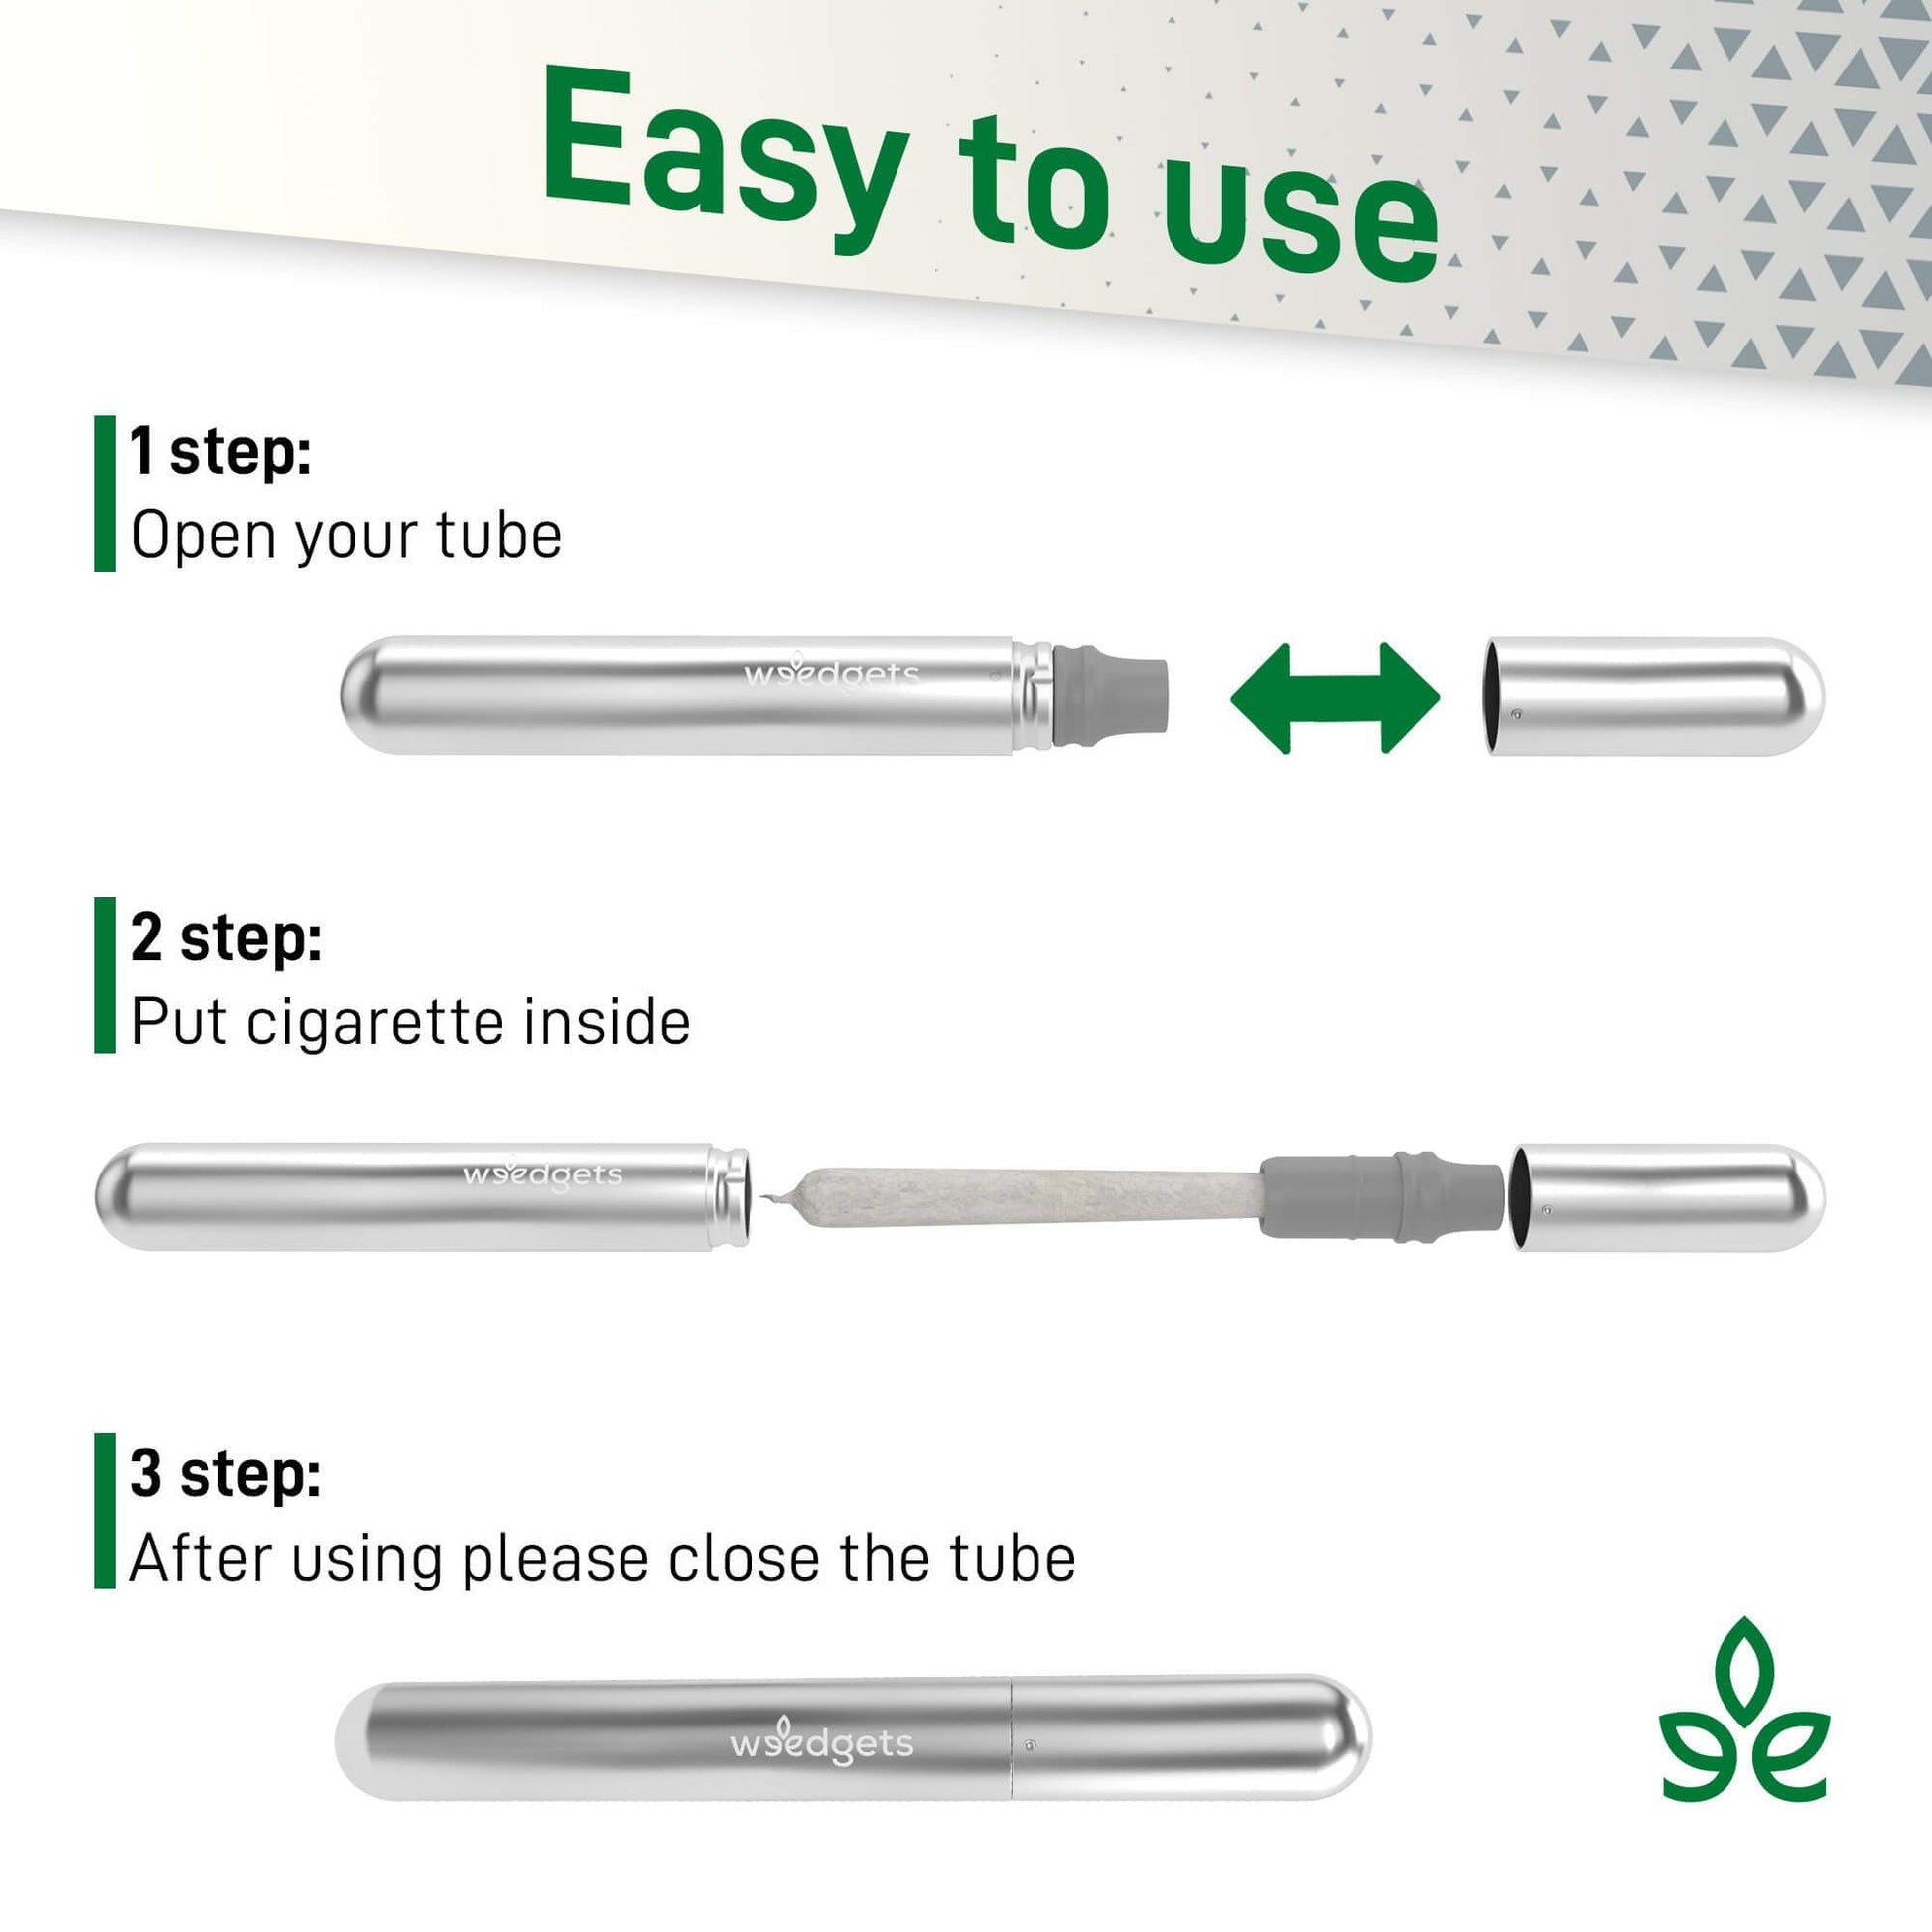 Weedgets Water Tight & Smell Proof Filtered Case for Joints